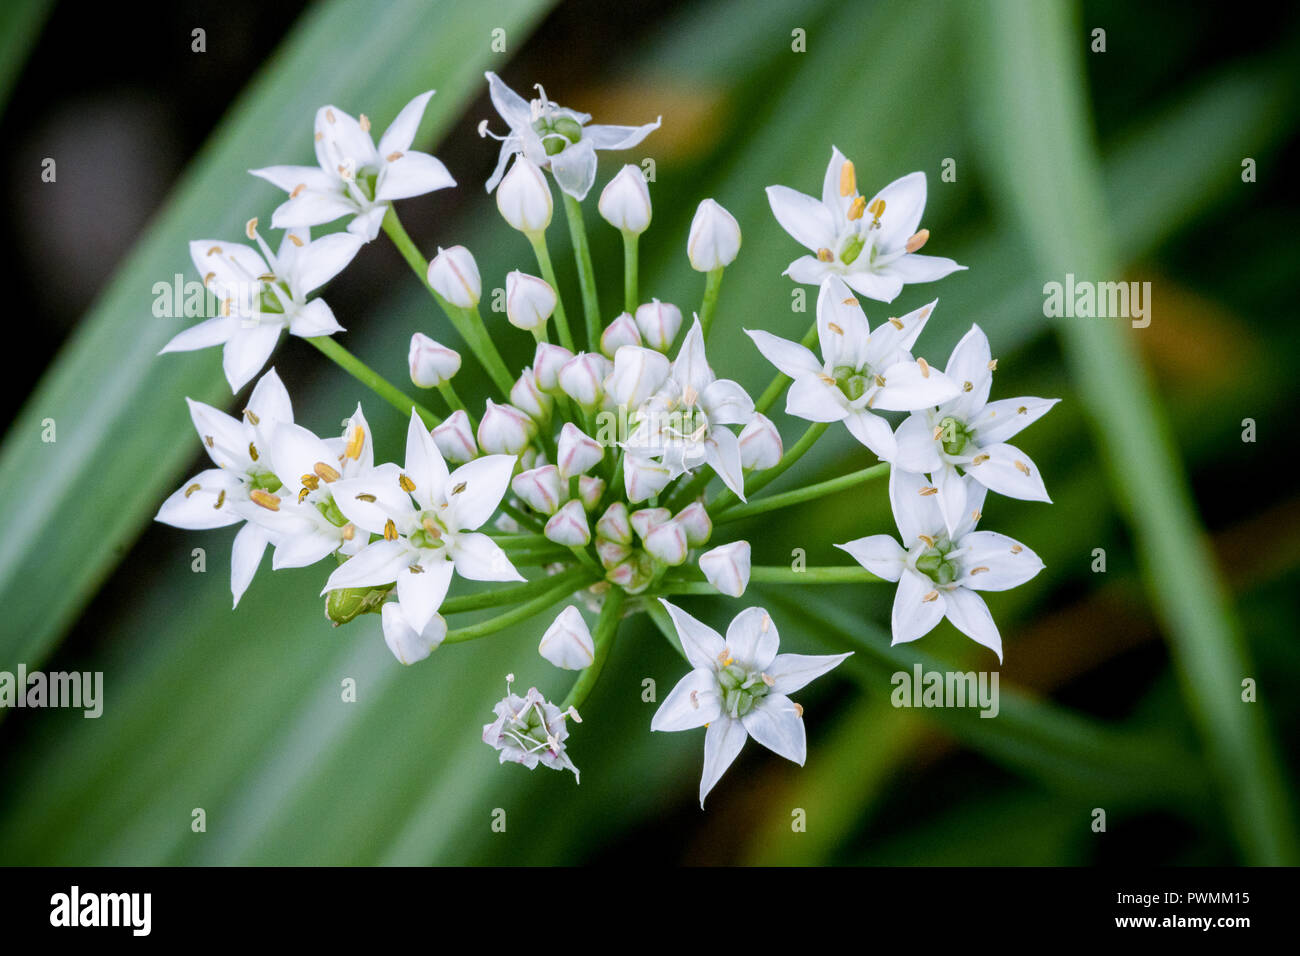 Close up of white Chinese Chives with a blurred grass background in the garden. Also known as Allium Tuberosum. Stock Photo